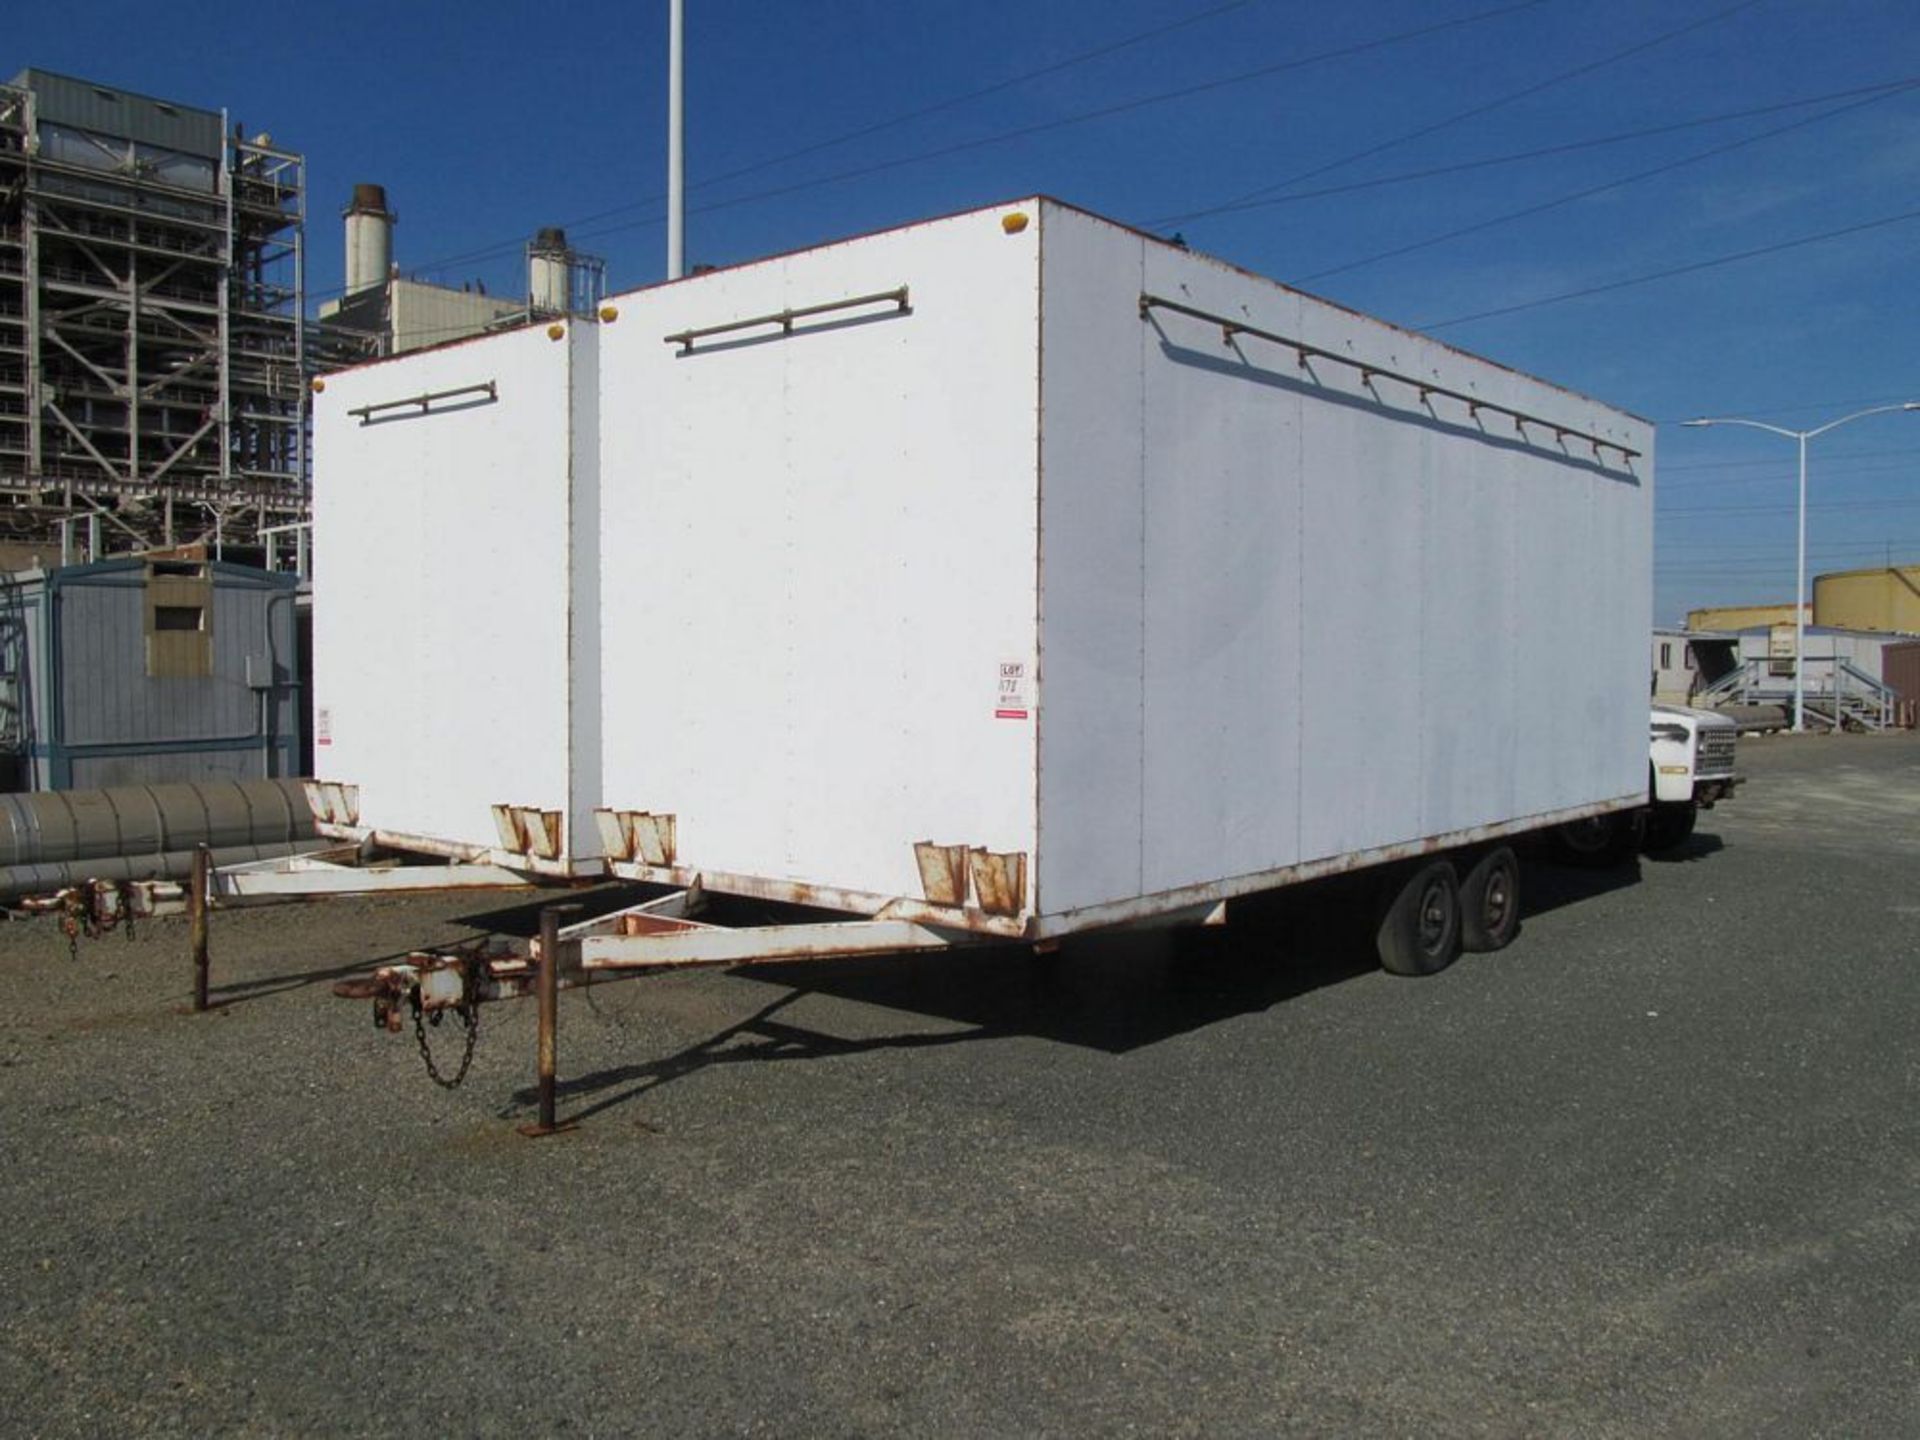 22' TANDEM AXEL UTILITY TRAILER, PINTLE HITCH, (NO TITLE)